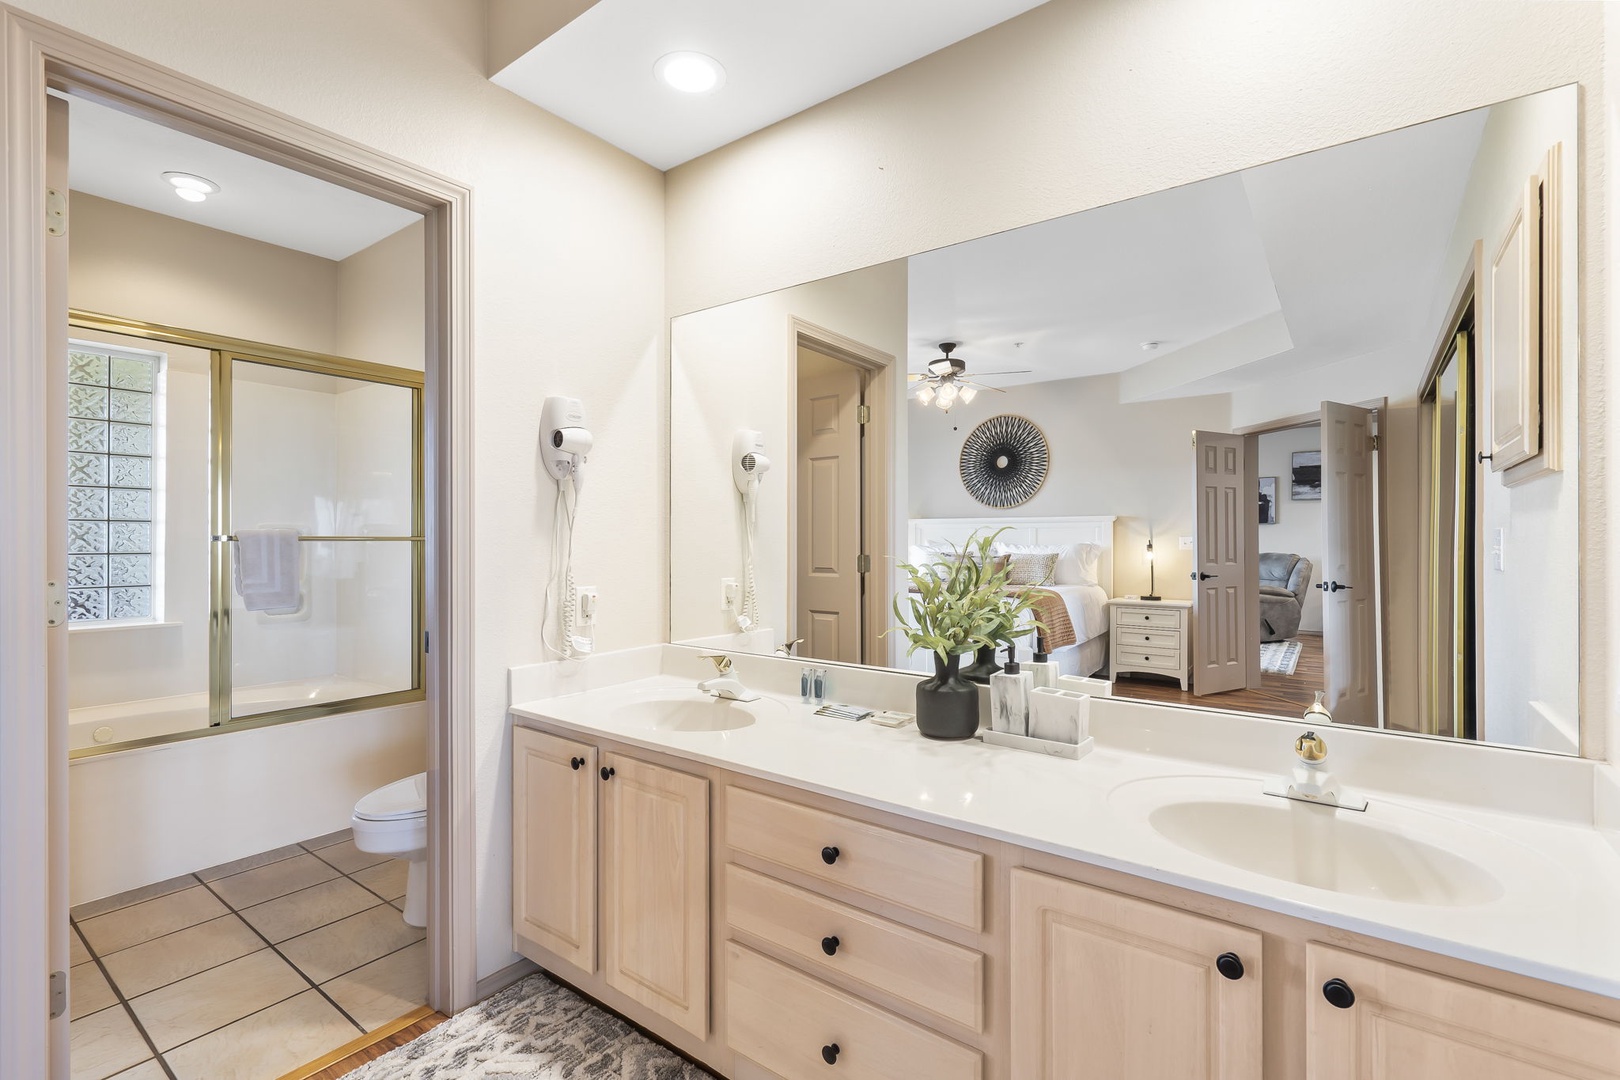 The king en suite offers an oversized double vanity & shower/tub combo